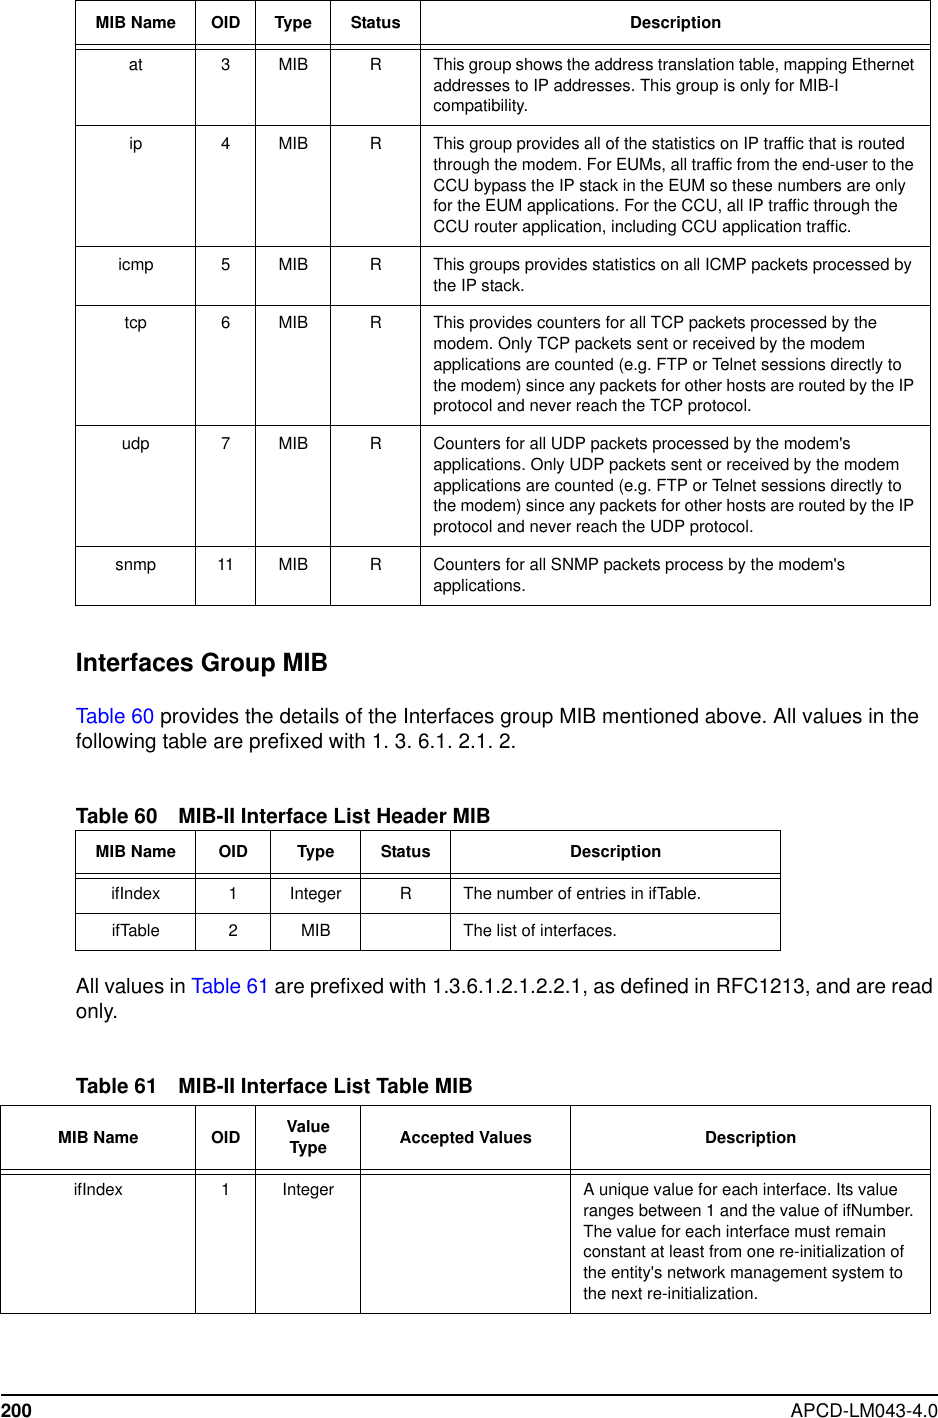 200 APCD-LM043-4.0Interfaces Group MIBTable 60 provides the details of the Interfaces group MIB mentioned above. All values in thefollowingtableareprefixedwith1.3.6.1.2.1.2.Table 60 MIB-II Interface List Header MIBAll values in Table 61 are prefixed with 1.3.6.1.2.1.2.2.1, as defined in RFC1213, and are readonly.Table 61 MIB-II Interface List Table MIBat 3 MIB R This group shows the address translation table, mapping Ethernetaddresses to IP addresses. This group is only for MIB-Icompatibility.ip 4 MIB R This group provides all of the statistics on IP traffic that is routedthrough the modem. For EUMs, all traffic from the end-user to theCCU bypass the IP stack in the EUM so these numbers are onlyfor the EUM applications. For the CCU, all IP traffic through theCCU router application, including CCU application traffic.icmp 5 MIB R This groups provides statistics on all ICMP packets processed bythe IP stack.tcp 6 MIB R This provides counters for all TCP packets processed by themodem. Only TCP packets sent or received by the modemapplications are counted (e.g. FTP or Telnet sessions directly tothe modem) since any packets for other hosts are routed by the IPprotocol and never reach the TCP protocol.udp 7 MIB R Counters for all UDP packets processed by the modem&apos;sapplications. Only UDP packets sent or received by the modemapplications are counted (e.g. FTP or Telnet sessions directly tothe modem) since any packets for other hosts are routed by the IPprotocol and never reach the UDP protocol.snmp 11 MIB R Counters for all SNMP packets process by the modem&apos;sapplications.MIB Name OID Type Status DescriptionifIndex 1 Integer R The number of entries in ifTable.ifTable 2MIB Thelistofinterfaces.MIB Name OID Type Status DescriptionMIB Name OID ValueType Accepted Values DescriptionifIndex 1 Integer A unique value for each interface. Its valueranges between 1 and the value of ifNumber.The value for each interface must remainconstant at least from one re-initialization ofthe entity&apos;s network management system tothe next re-initialization.